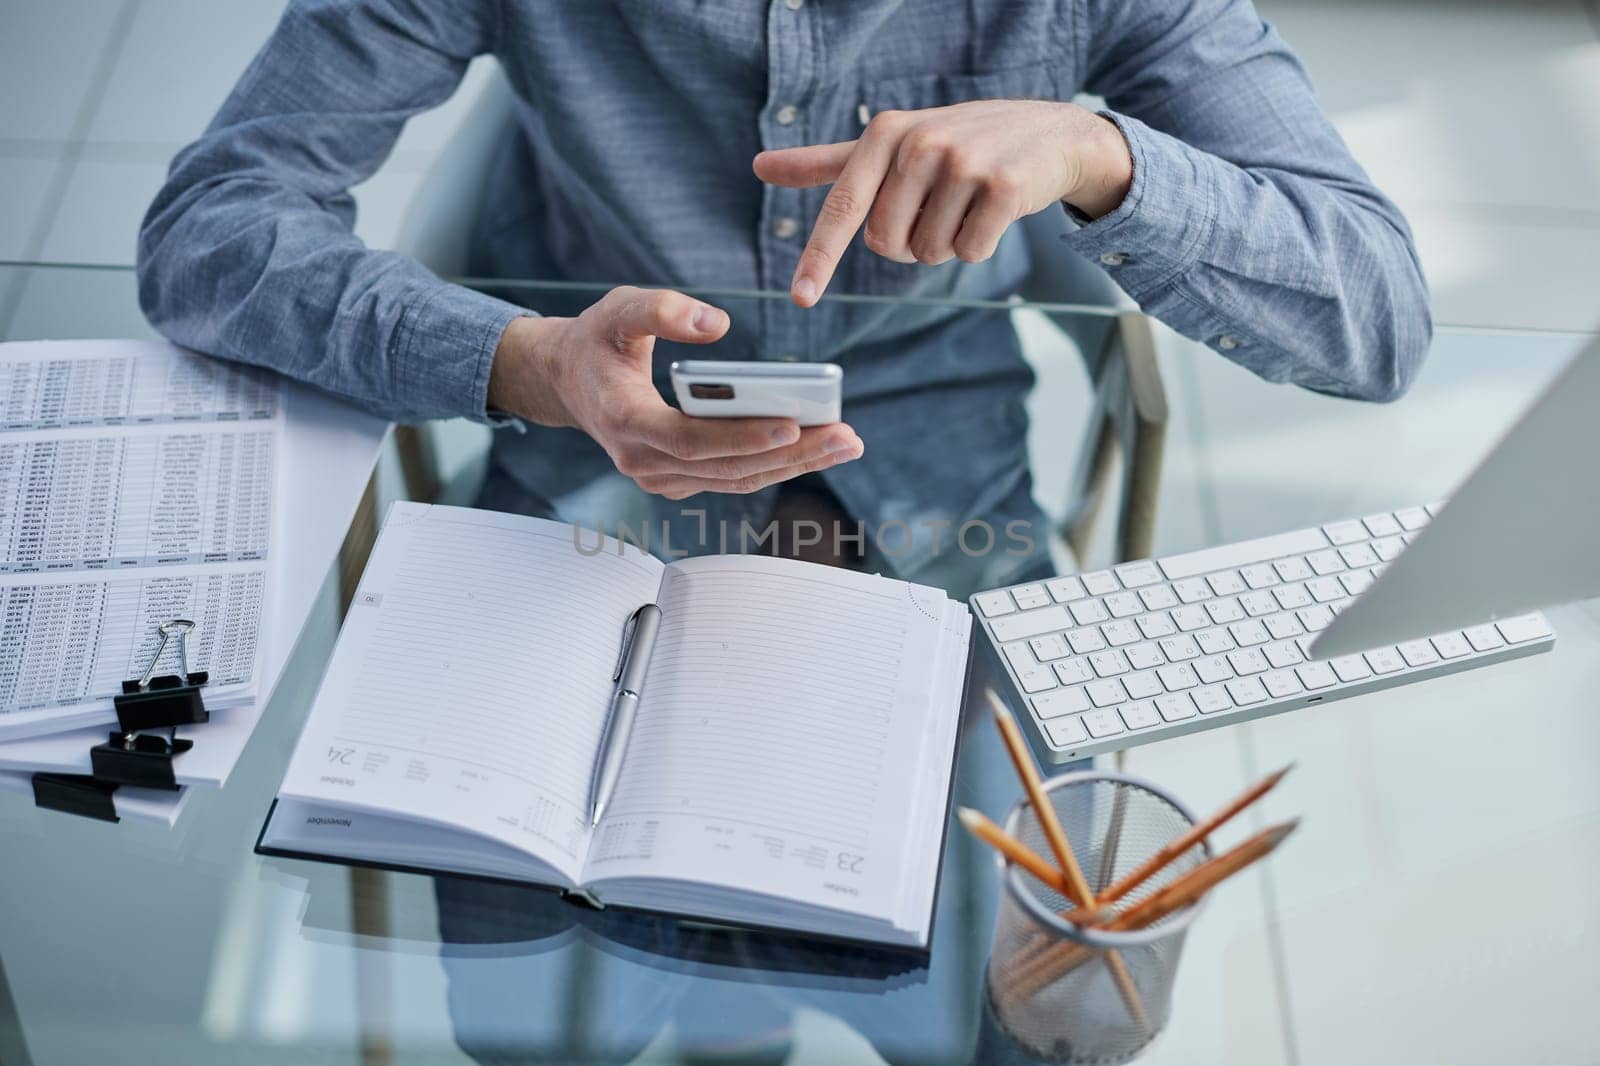 businessman professional executive holding mobile working at desk with smartphone.